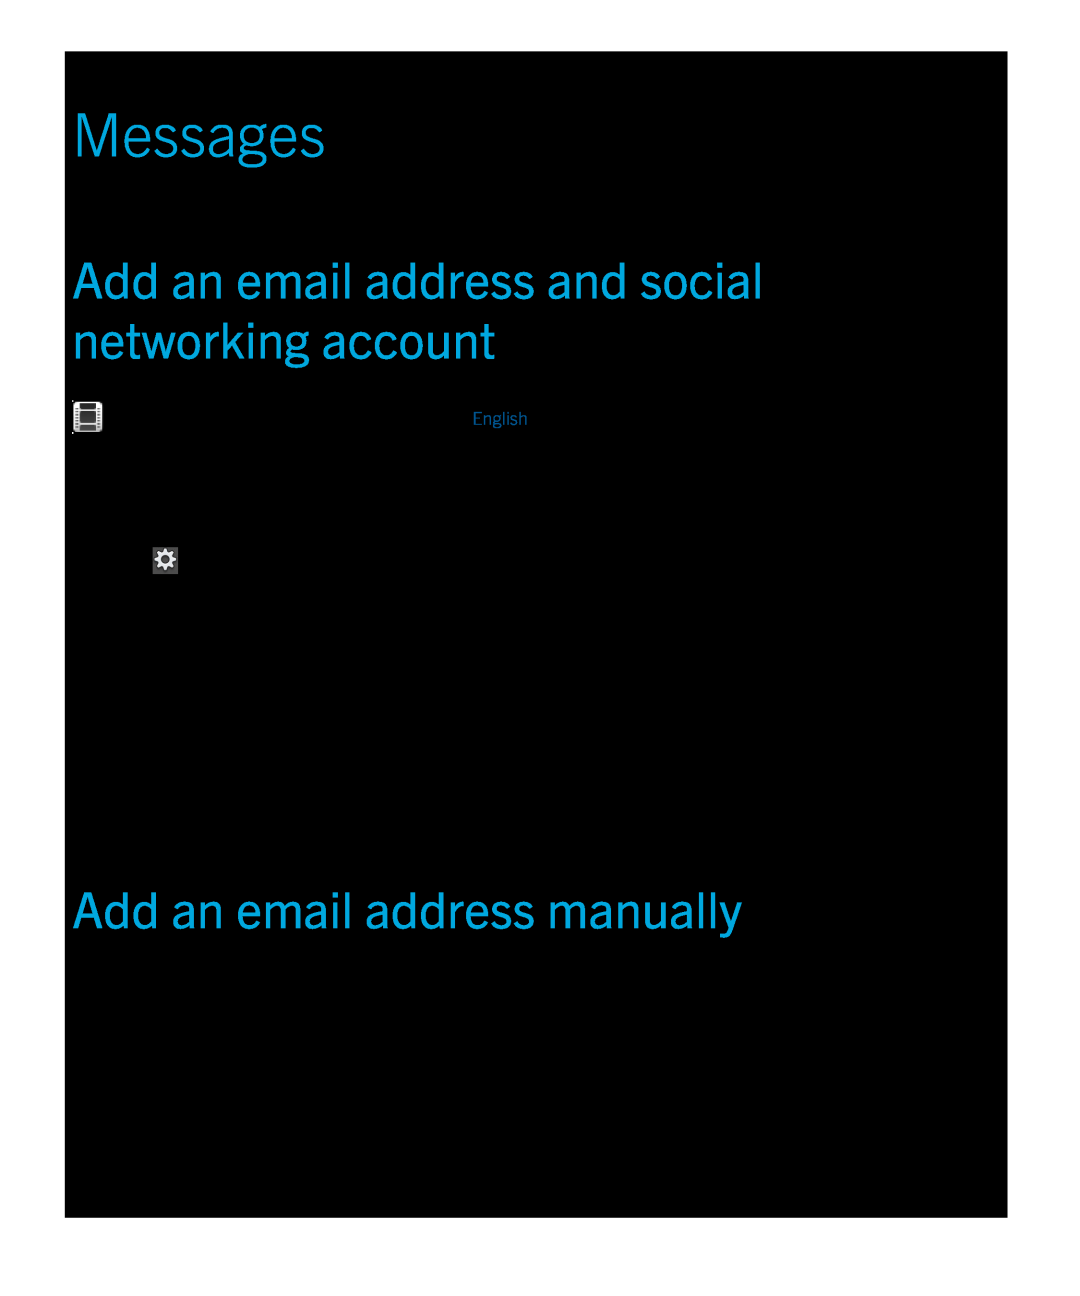 Blackberry 2.0.1 Messages, Add an email address and social networking account, Add an email address manually, Tap Continue 